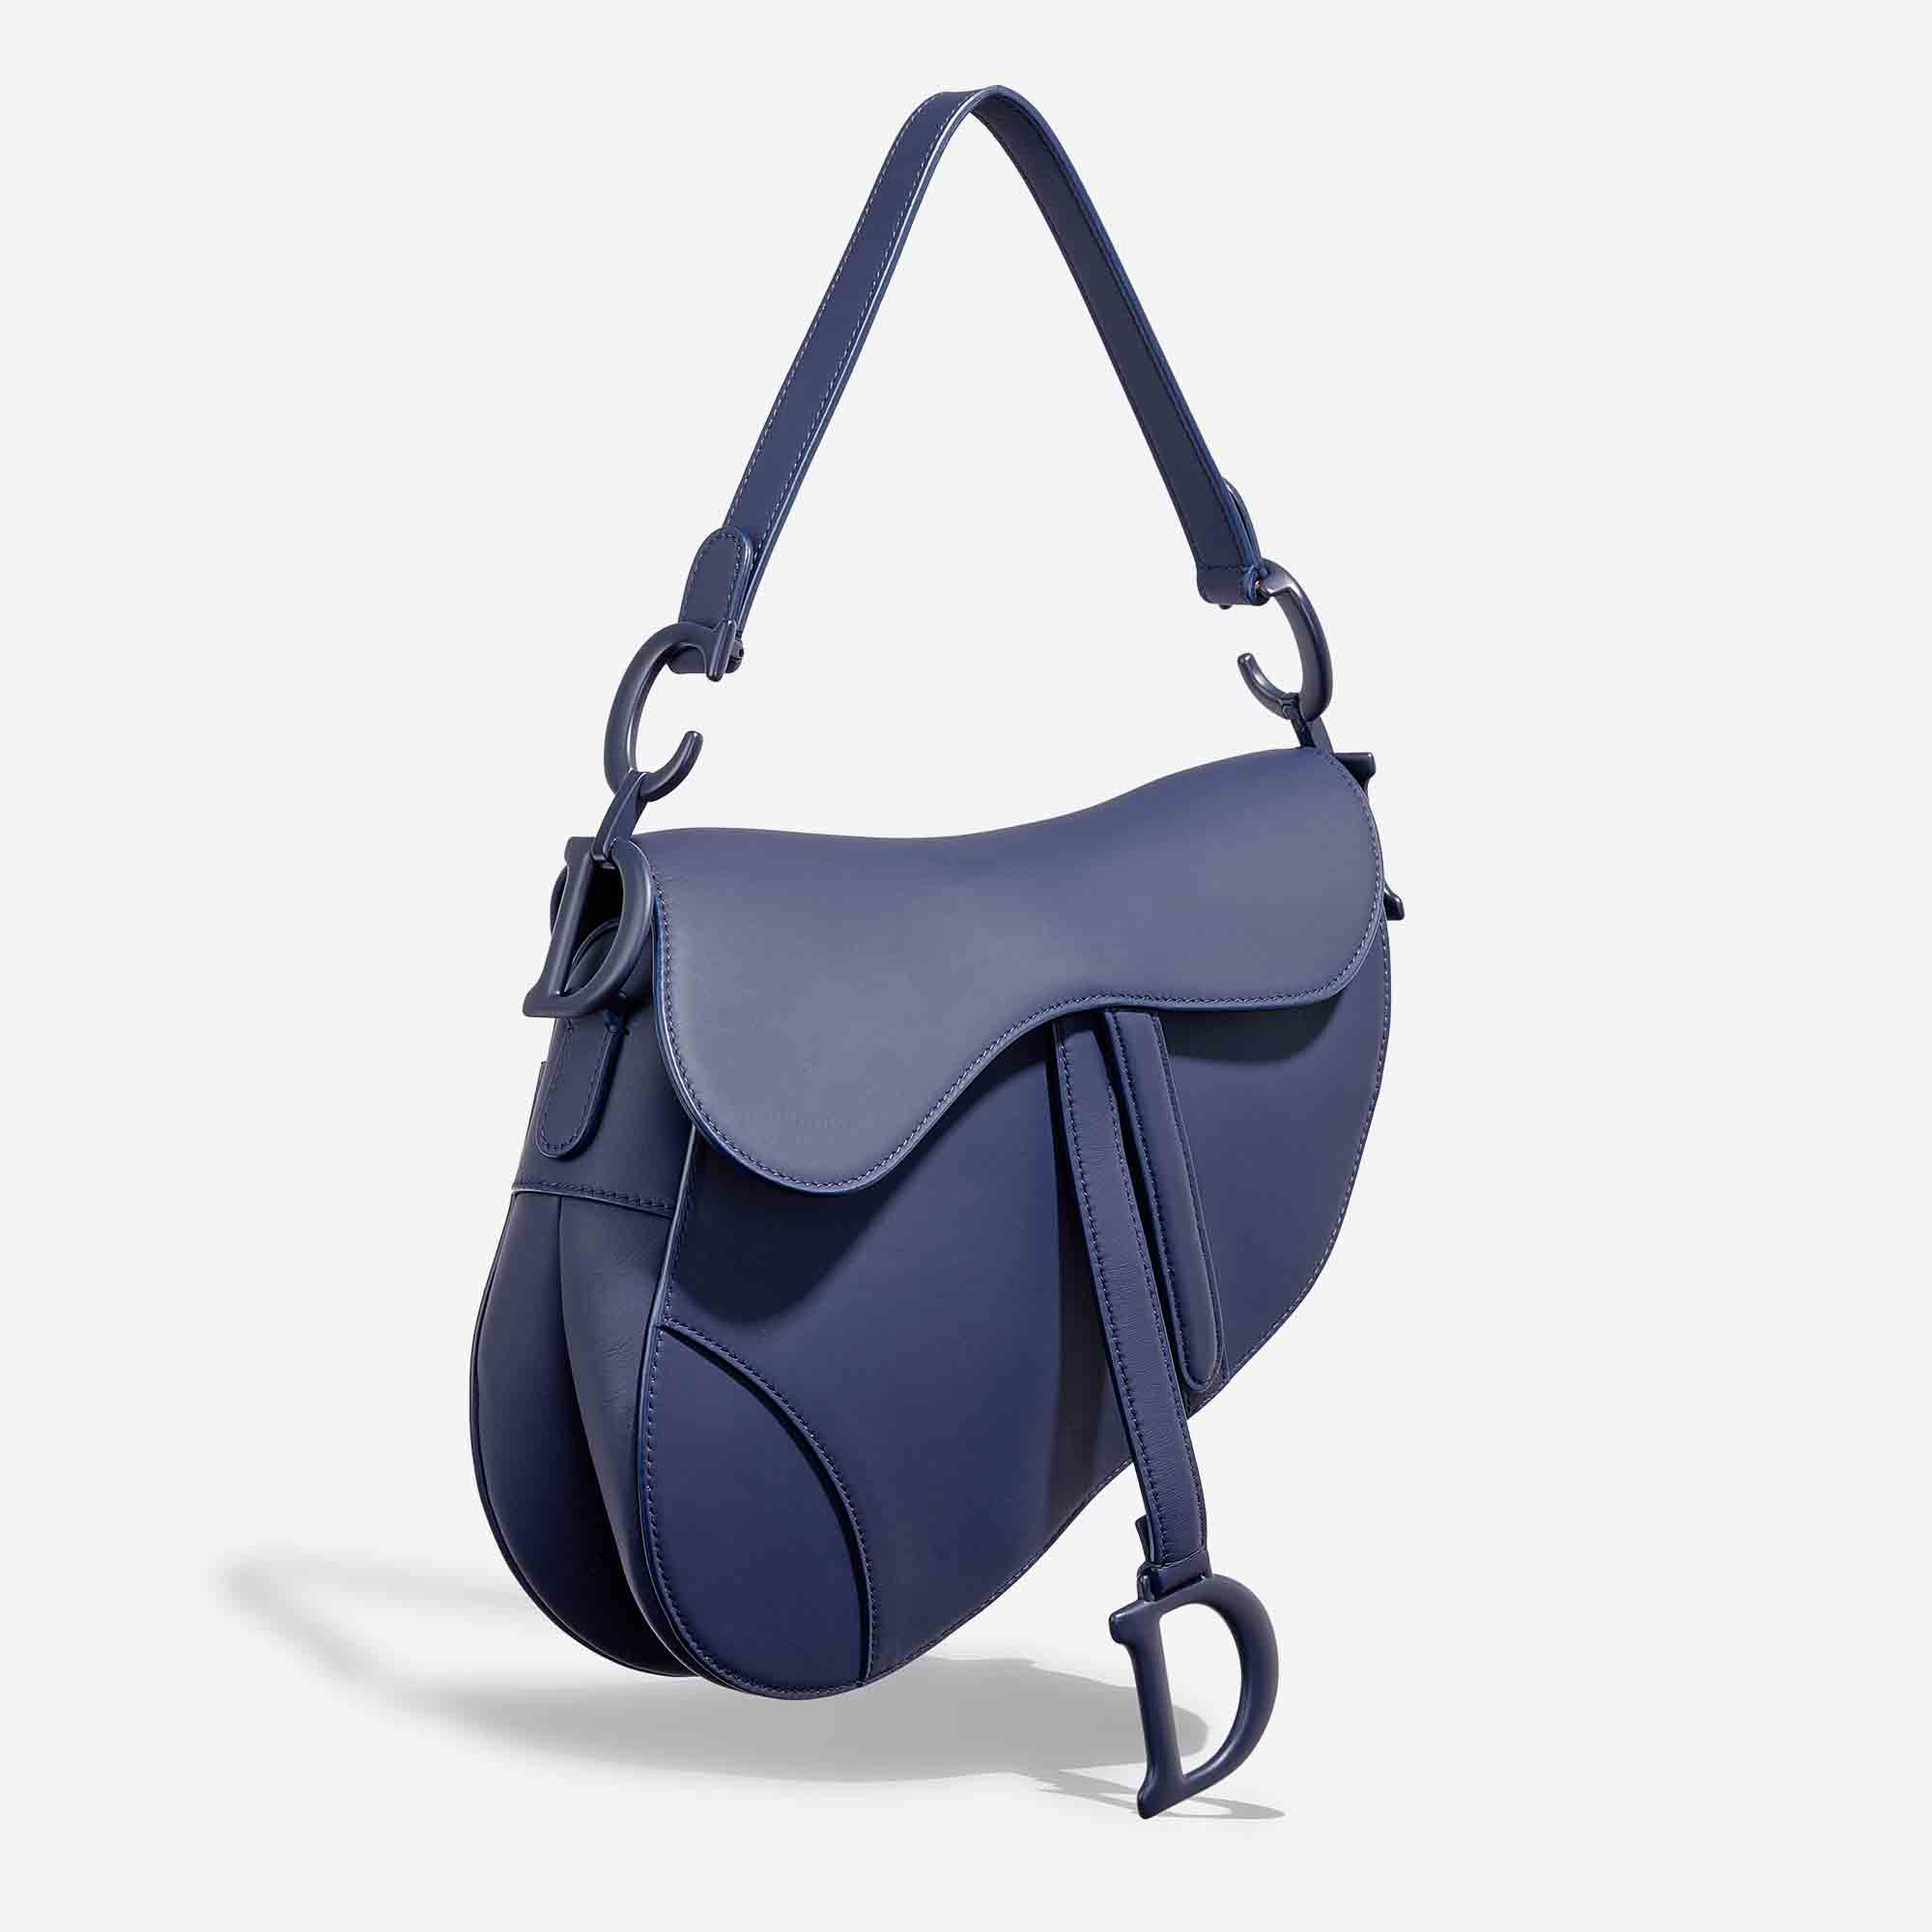 Diors Iconic Saddle Bag is Officially Back